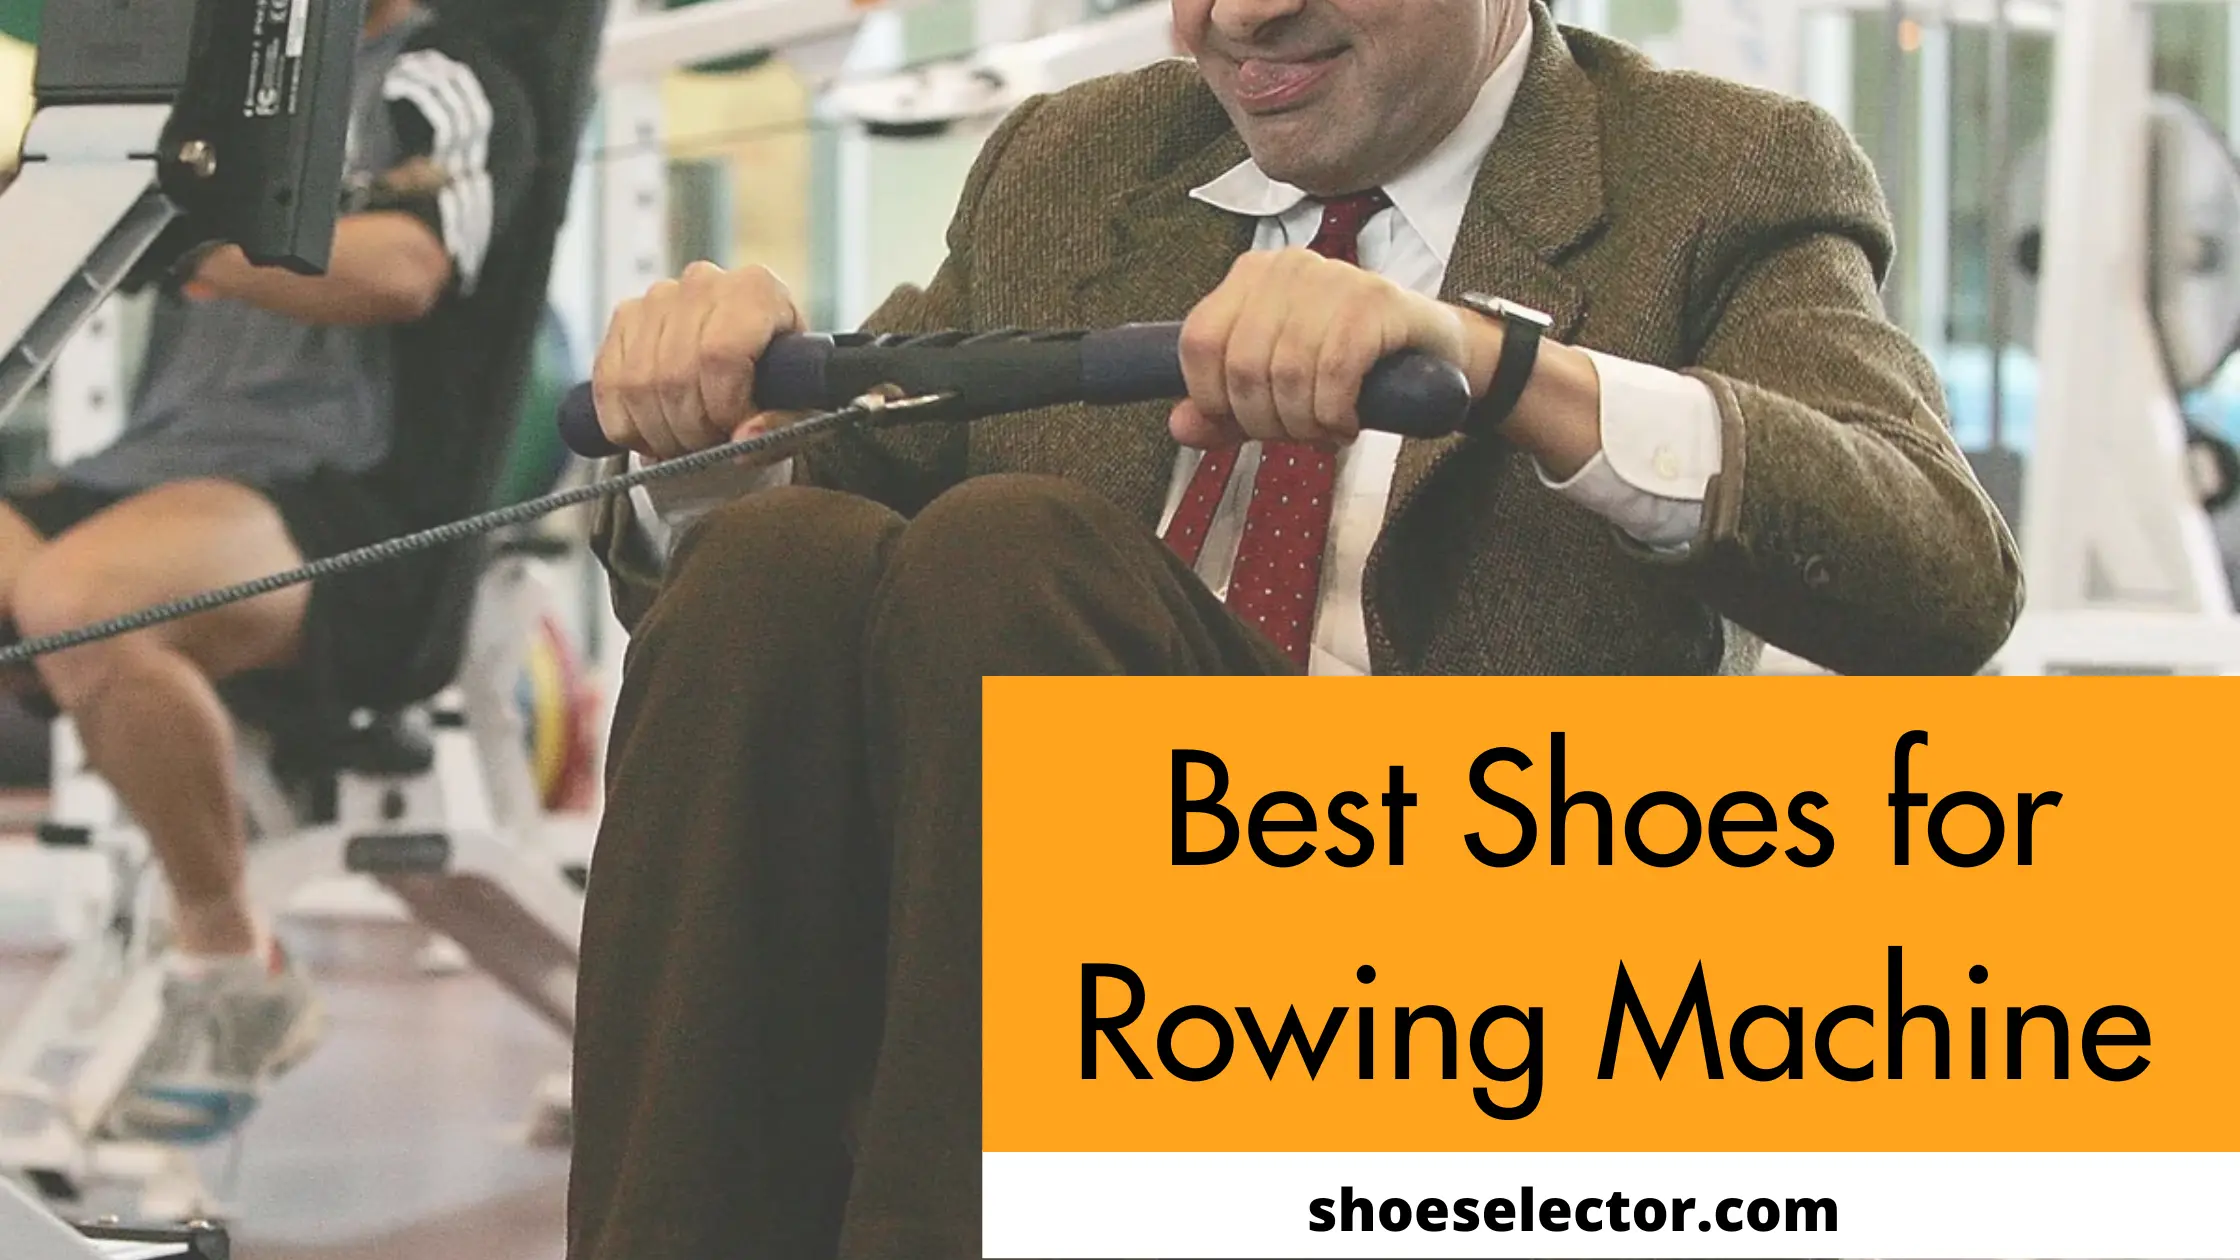 Best Shoes For Rowing Machine - Complete Buying Guides